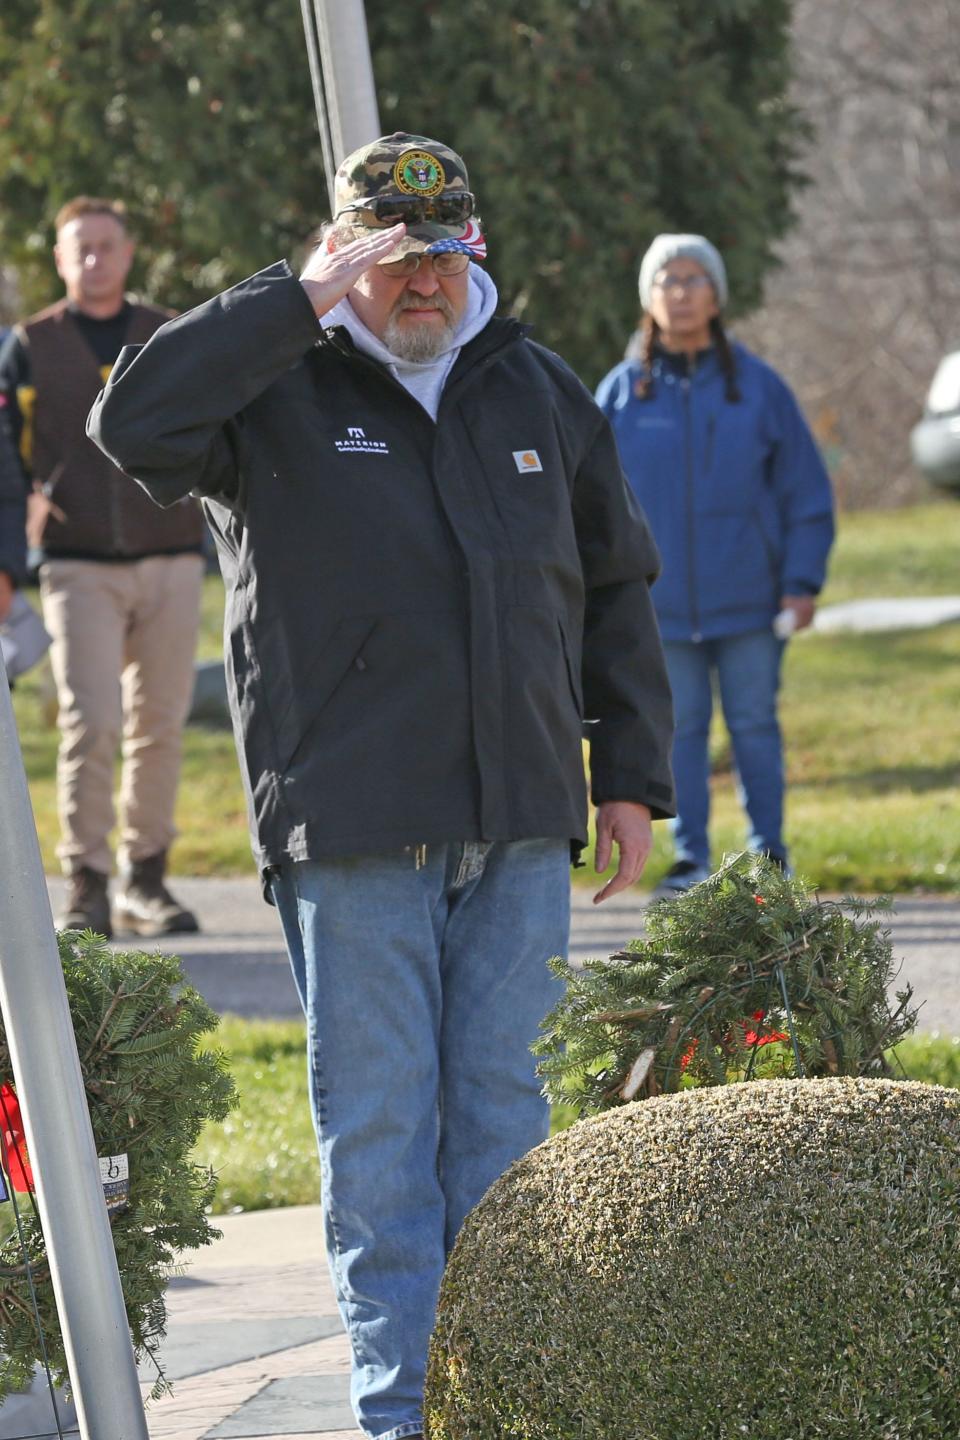 Sandusky County Army veteran Michael Wojtowicz salutes a wreath at Clay Township Cemetery, in Genoa. More than 2,000 wreaths were placed on veterans' graves across Ottawa County on Saturday by military servicemen and volunteers through the Wreaths Across America program.